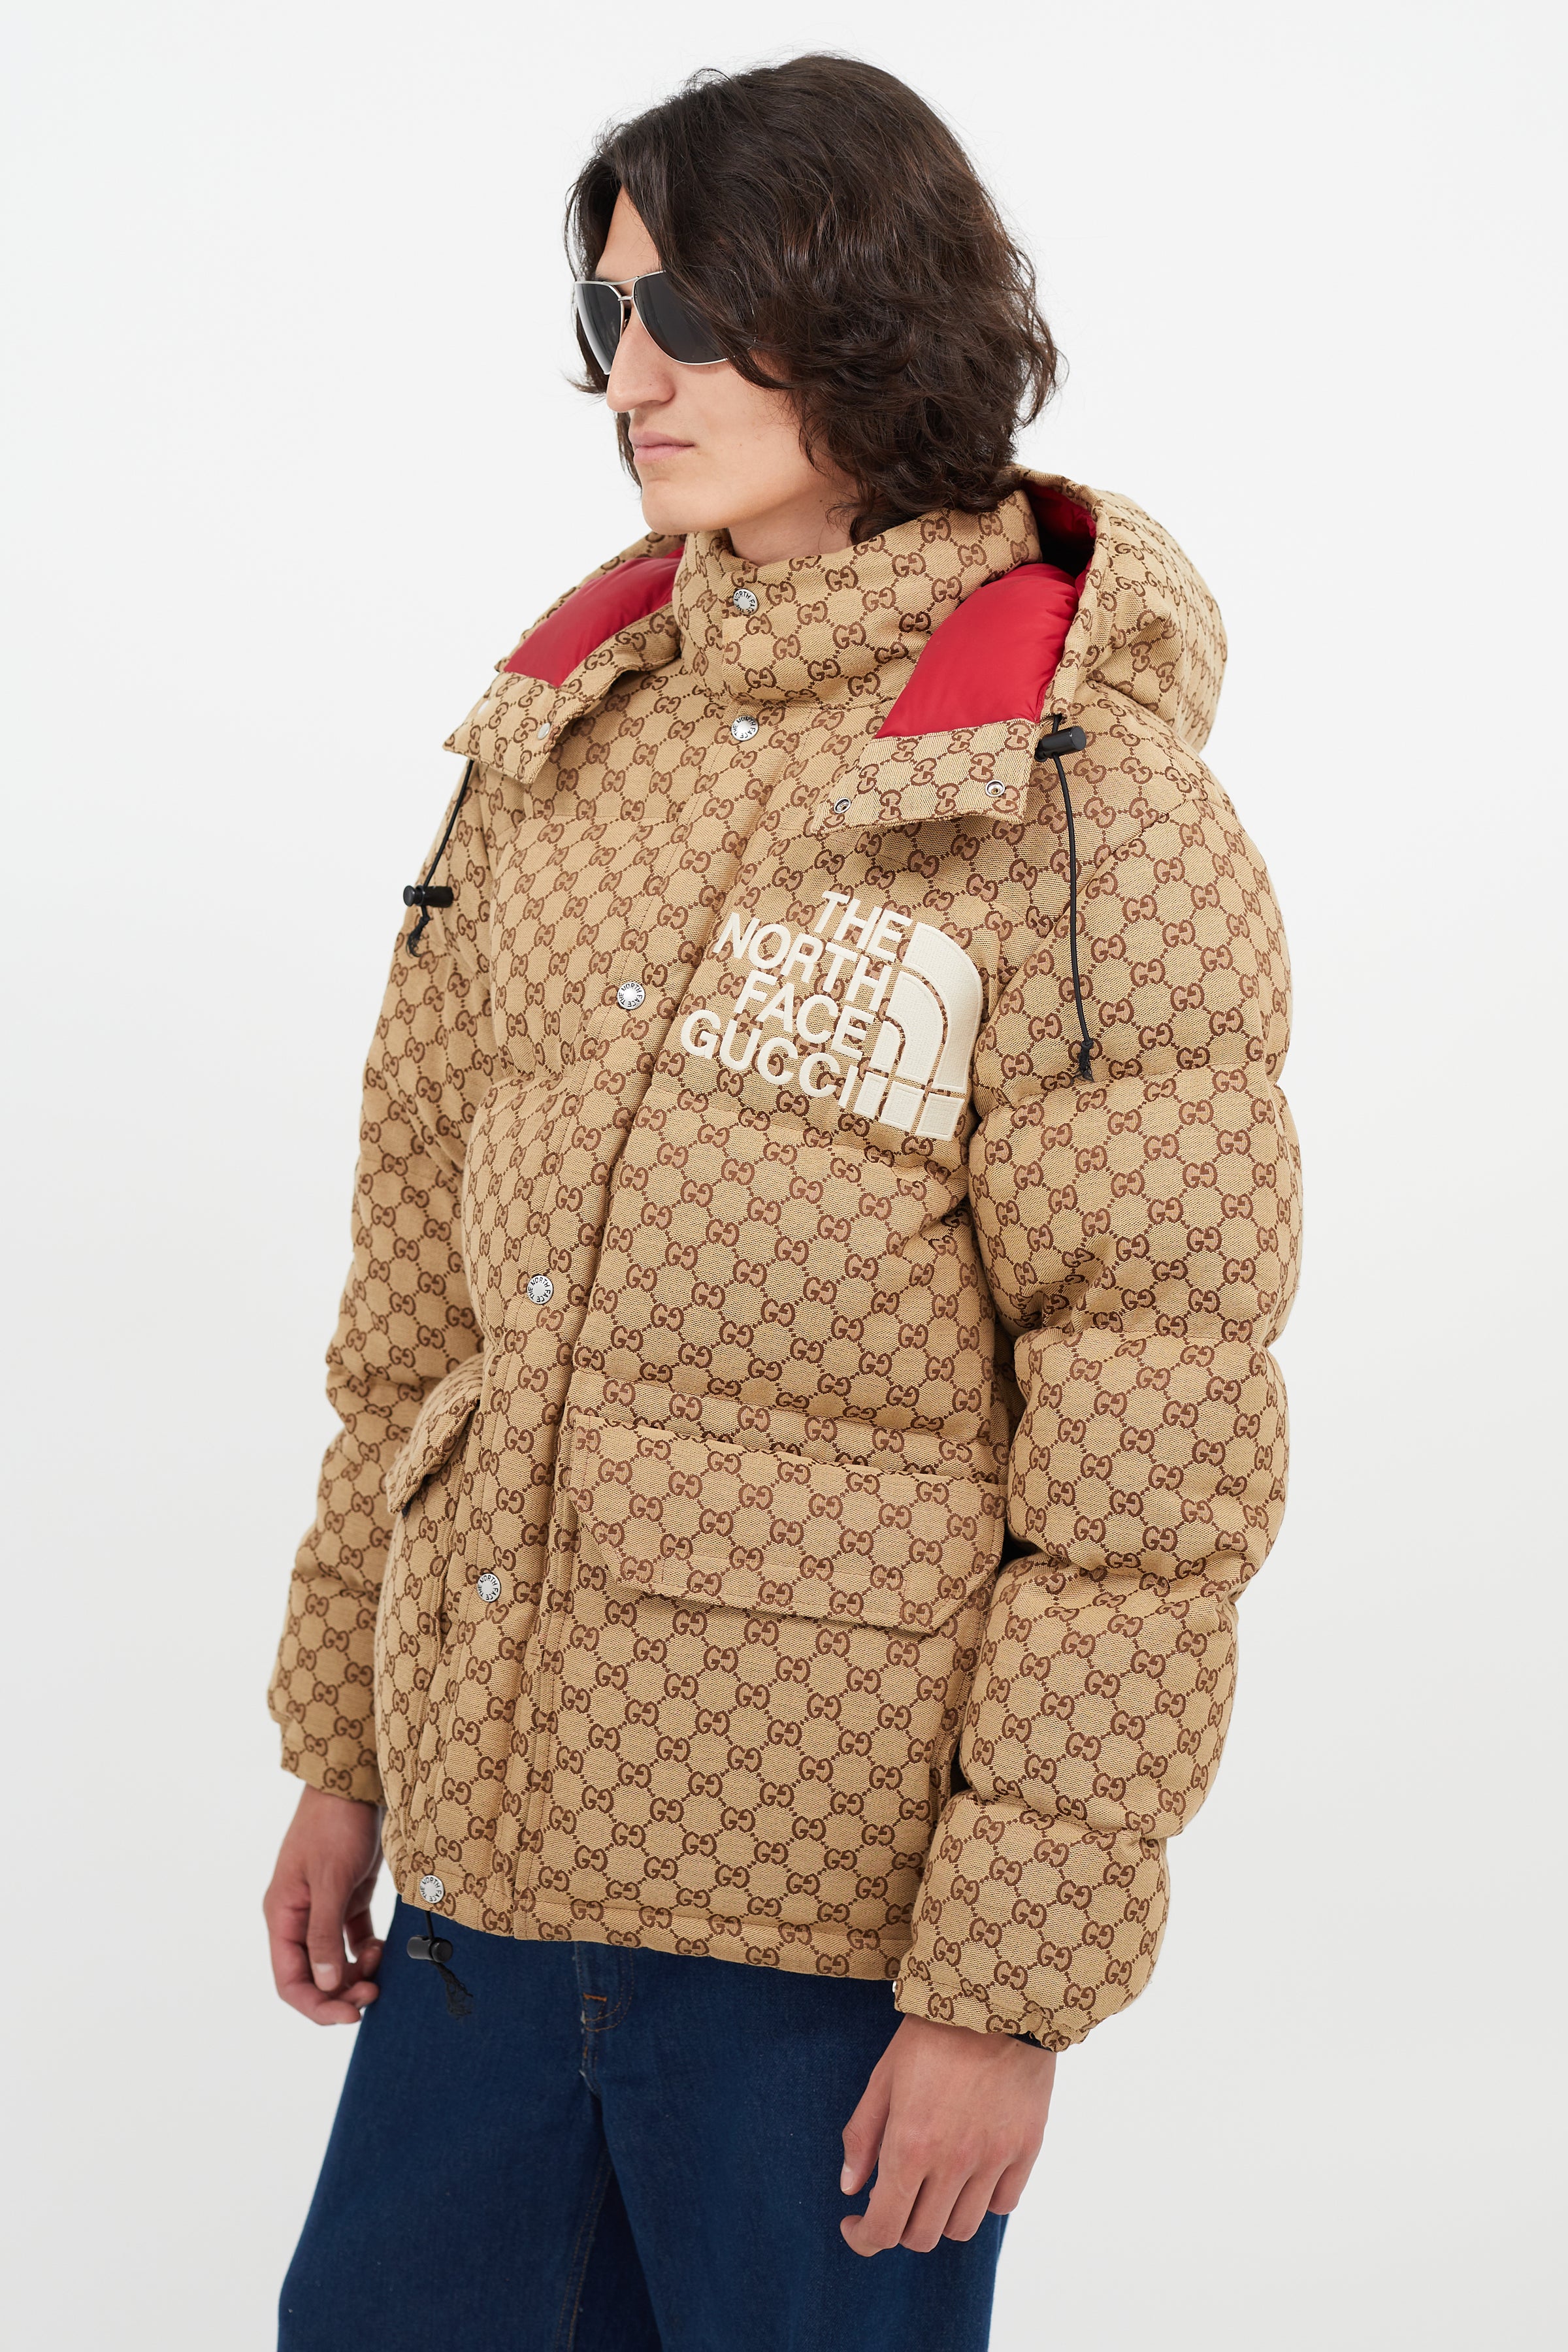 Gucci x The North Face Monogram Puffer Jacket Size XL